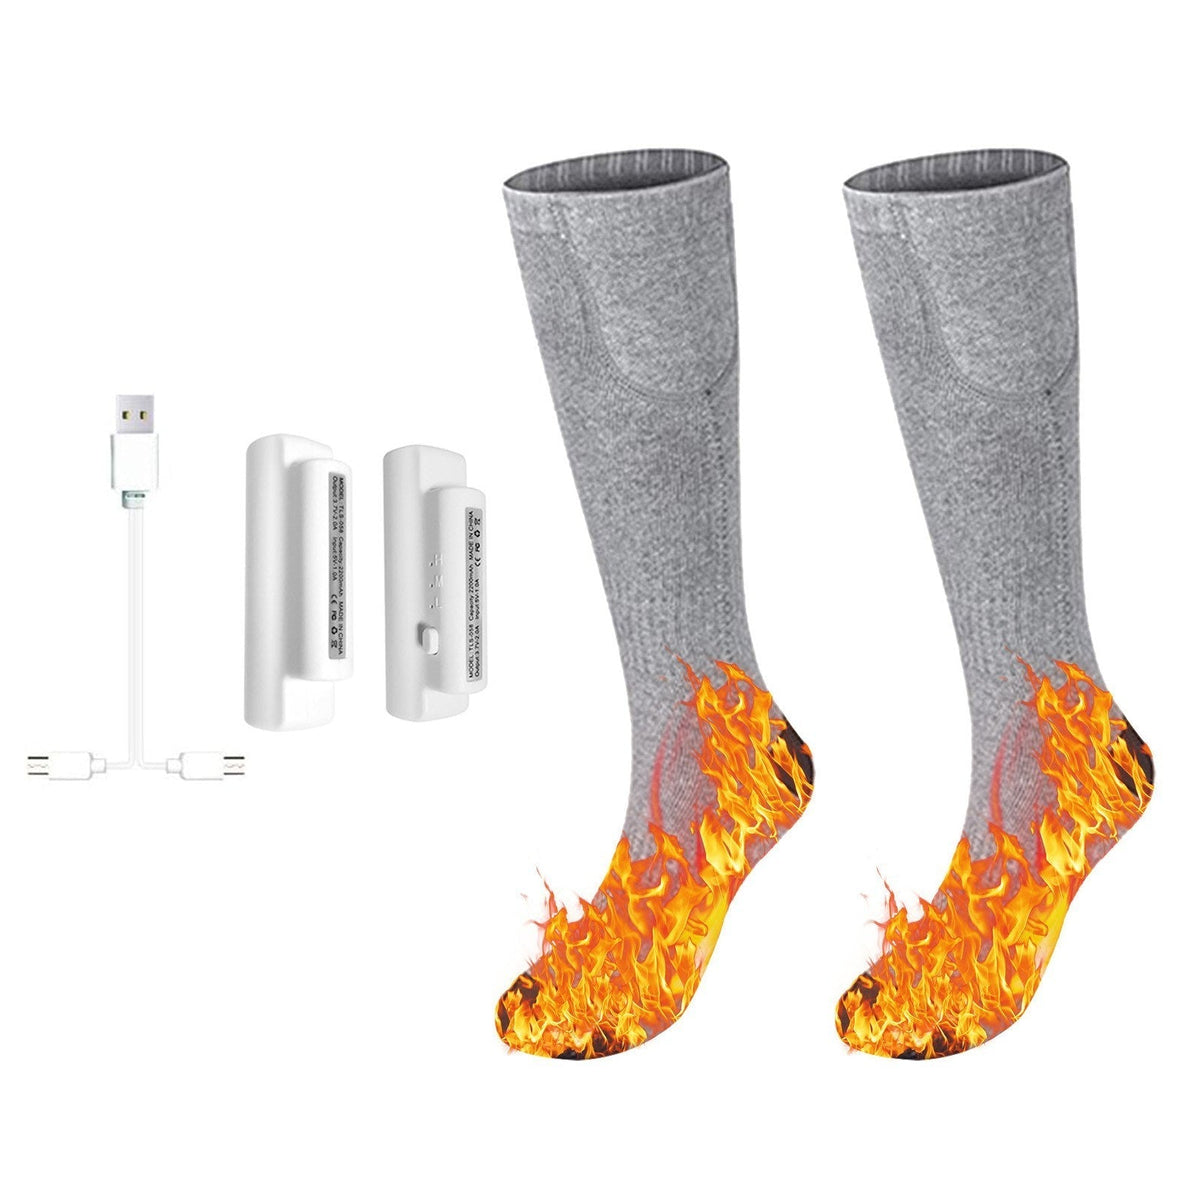 3.7V Heated SocksFoot Warmers for Men And Women, Electric Heating Socks, Washable Battery Heated Socks for Winter Skiing Hiking Fishing Riding, Keep